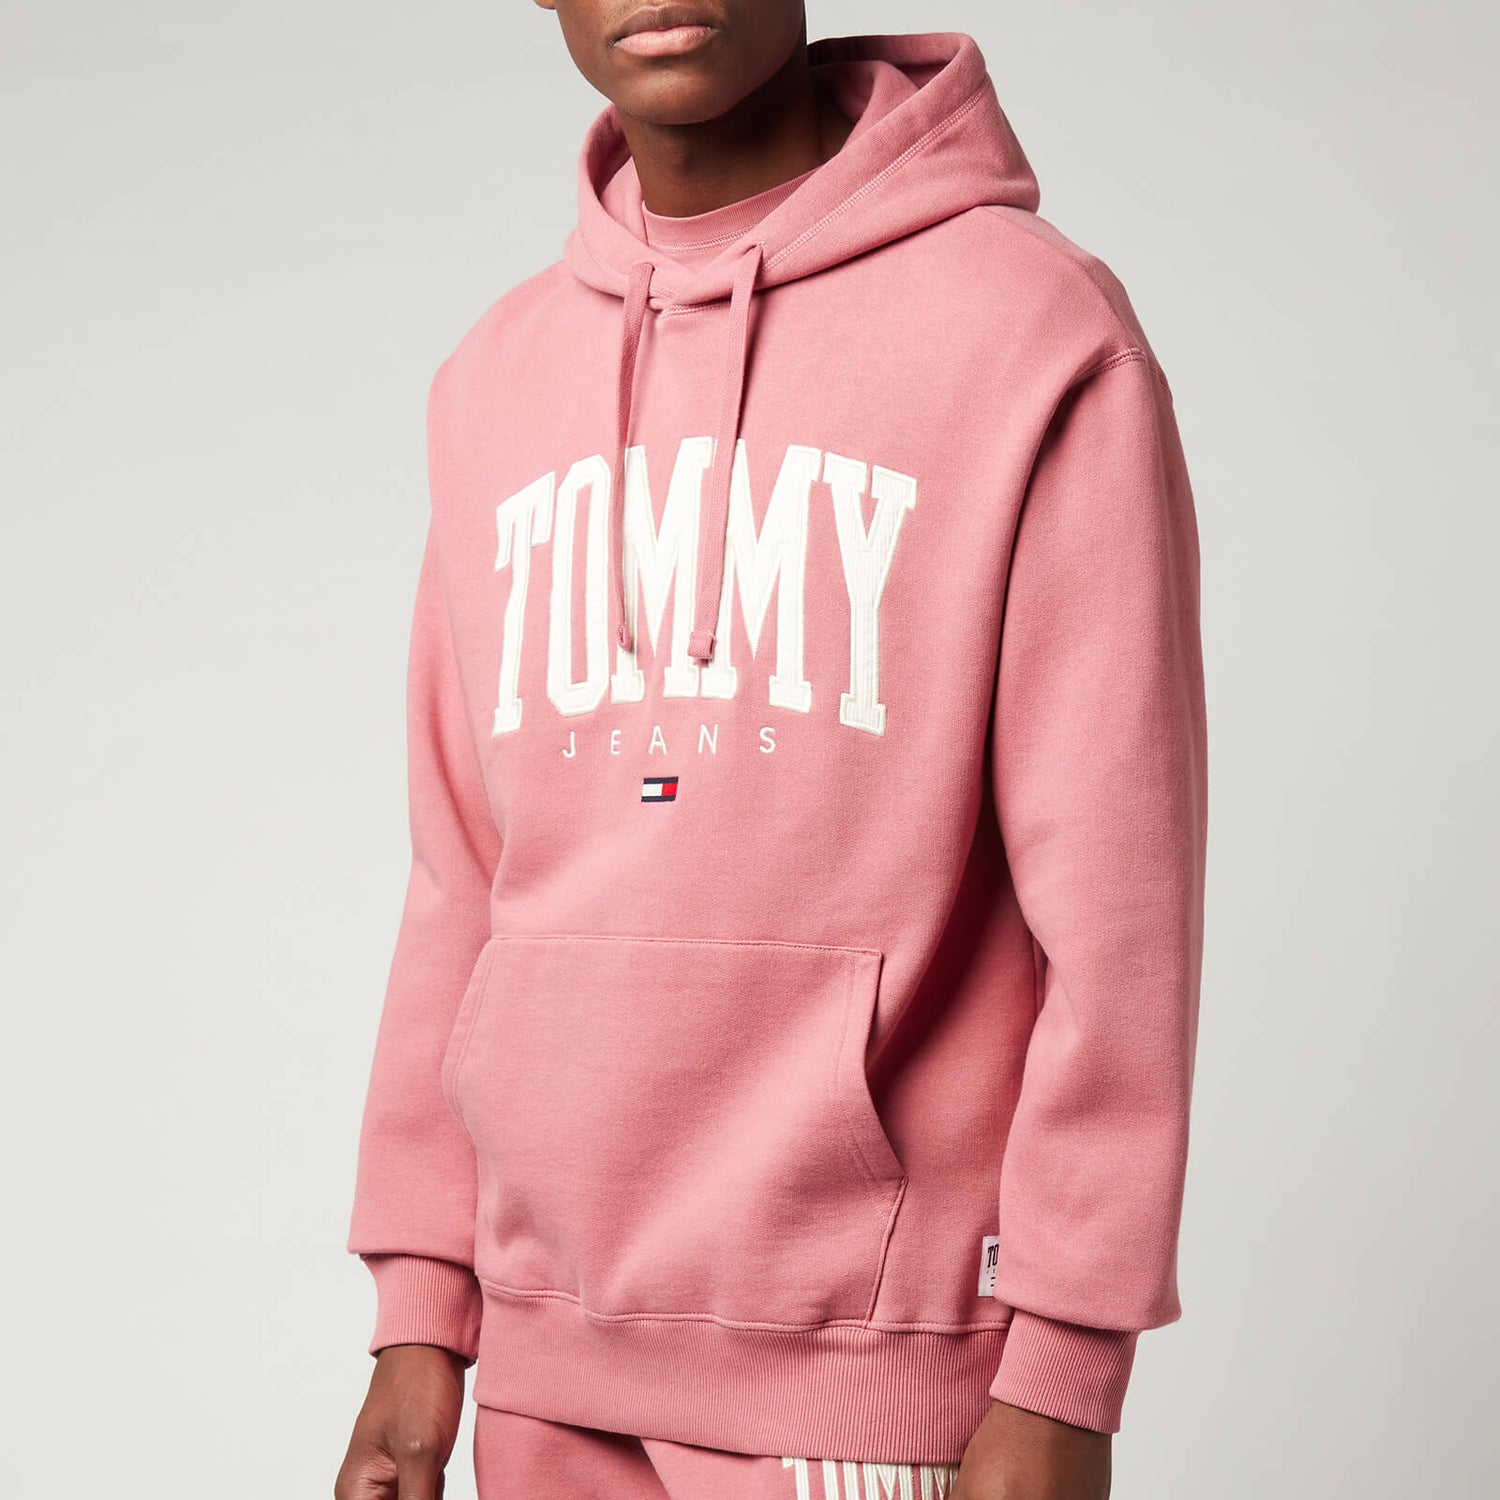 Tommy Jeans Men's Collegiate Pullover Hoodie - Moss Rose